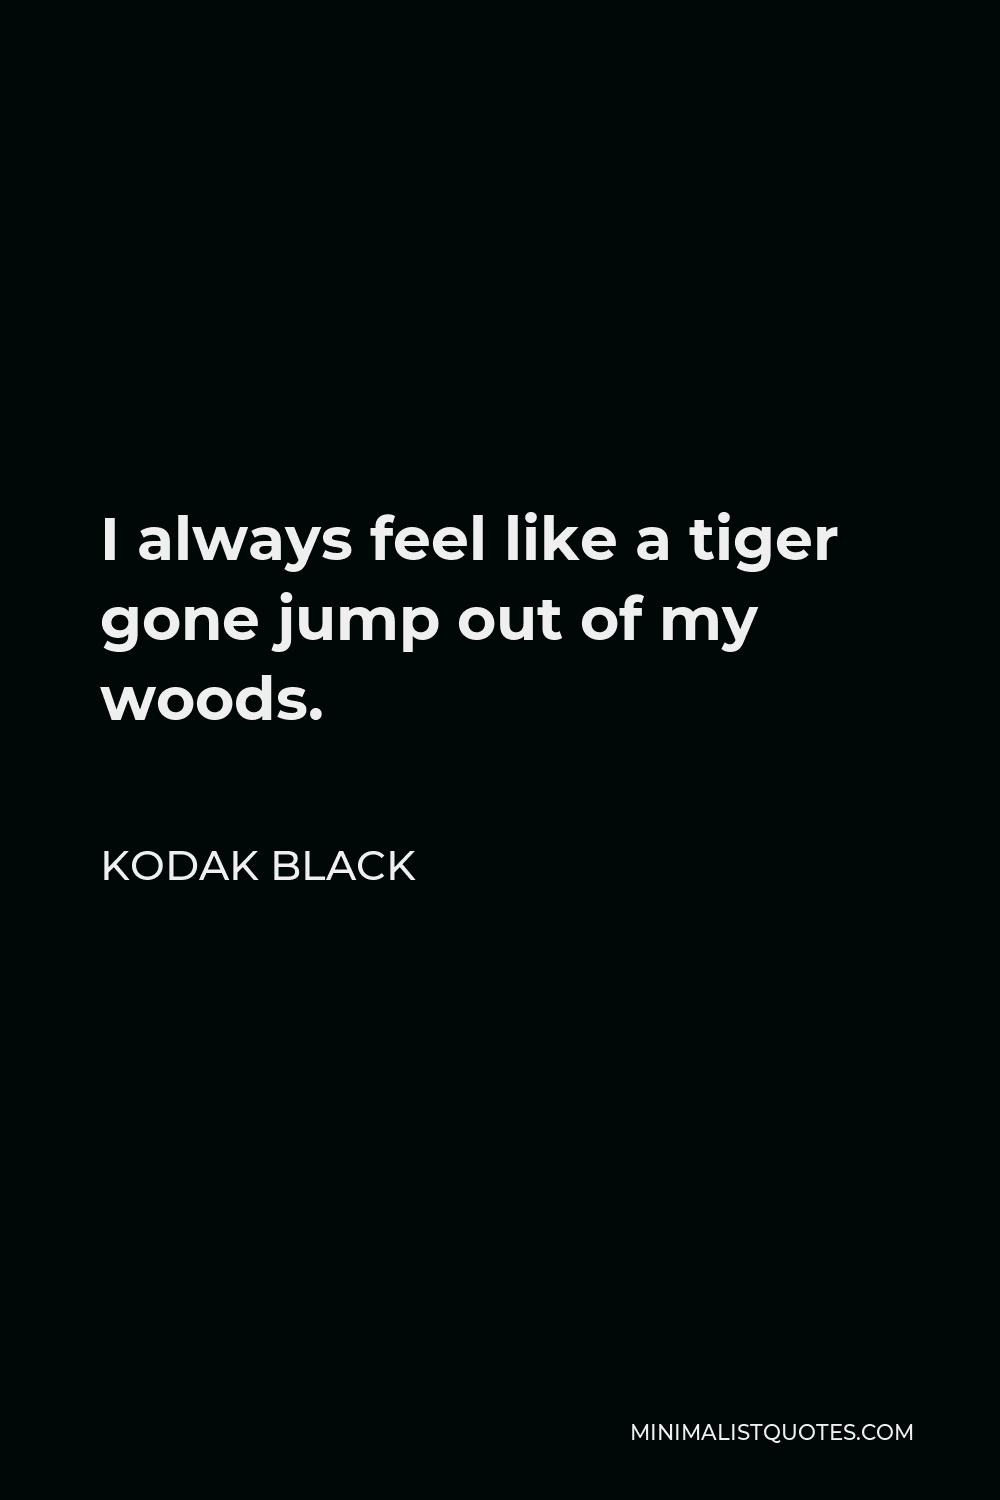 Kodak Black Quote - I always feel like a tiger gone jump out of my woods.